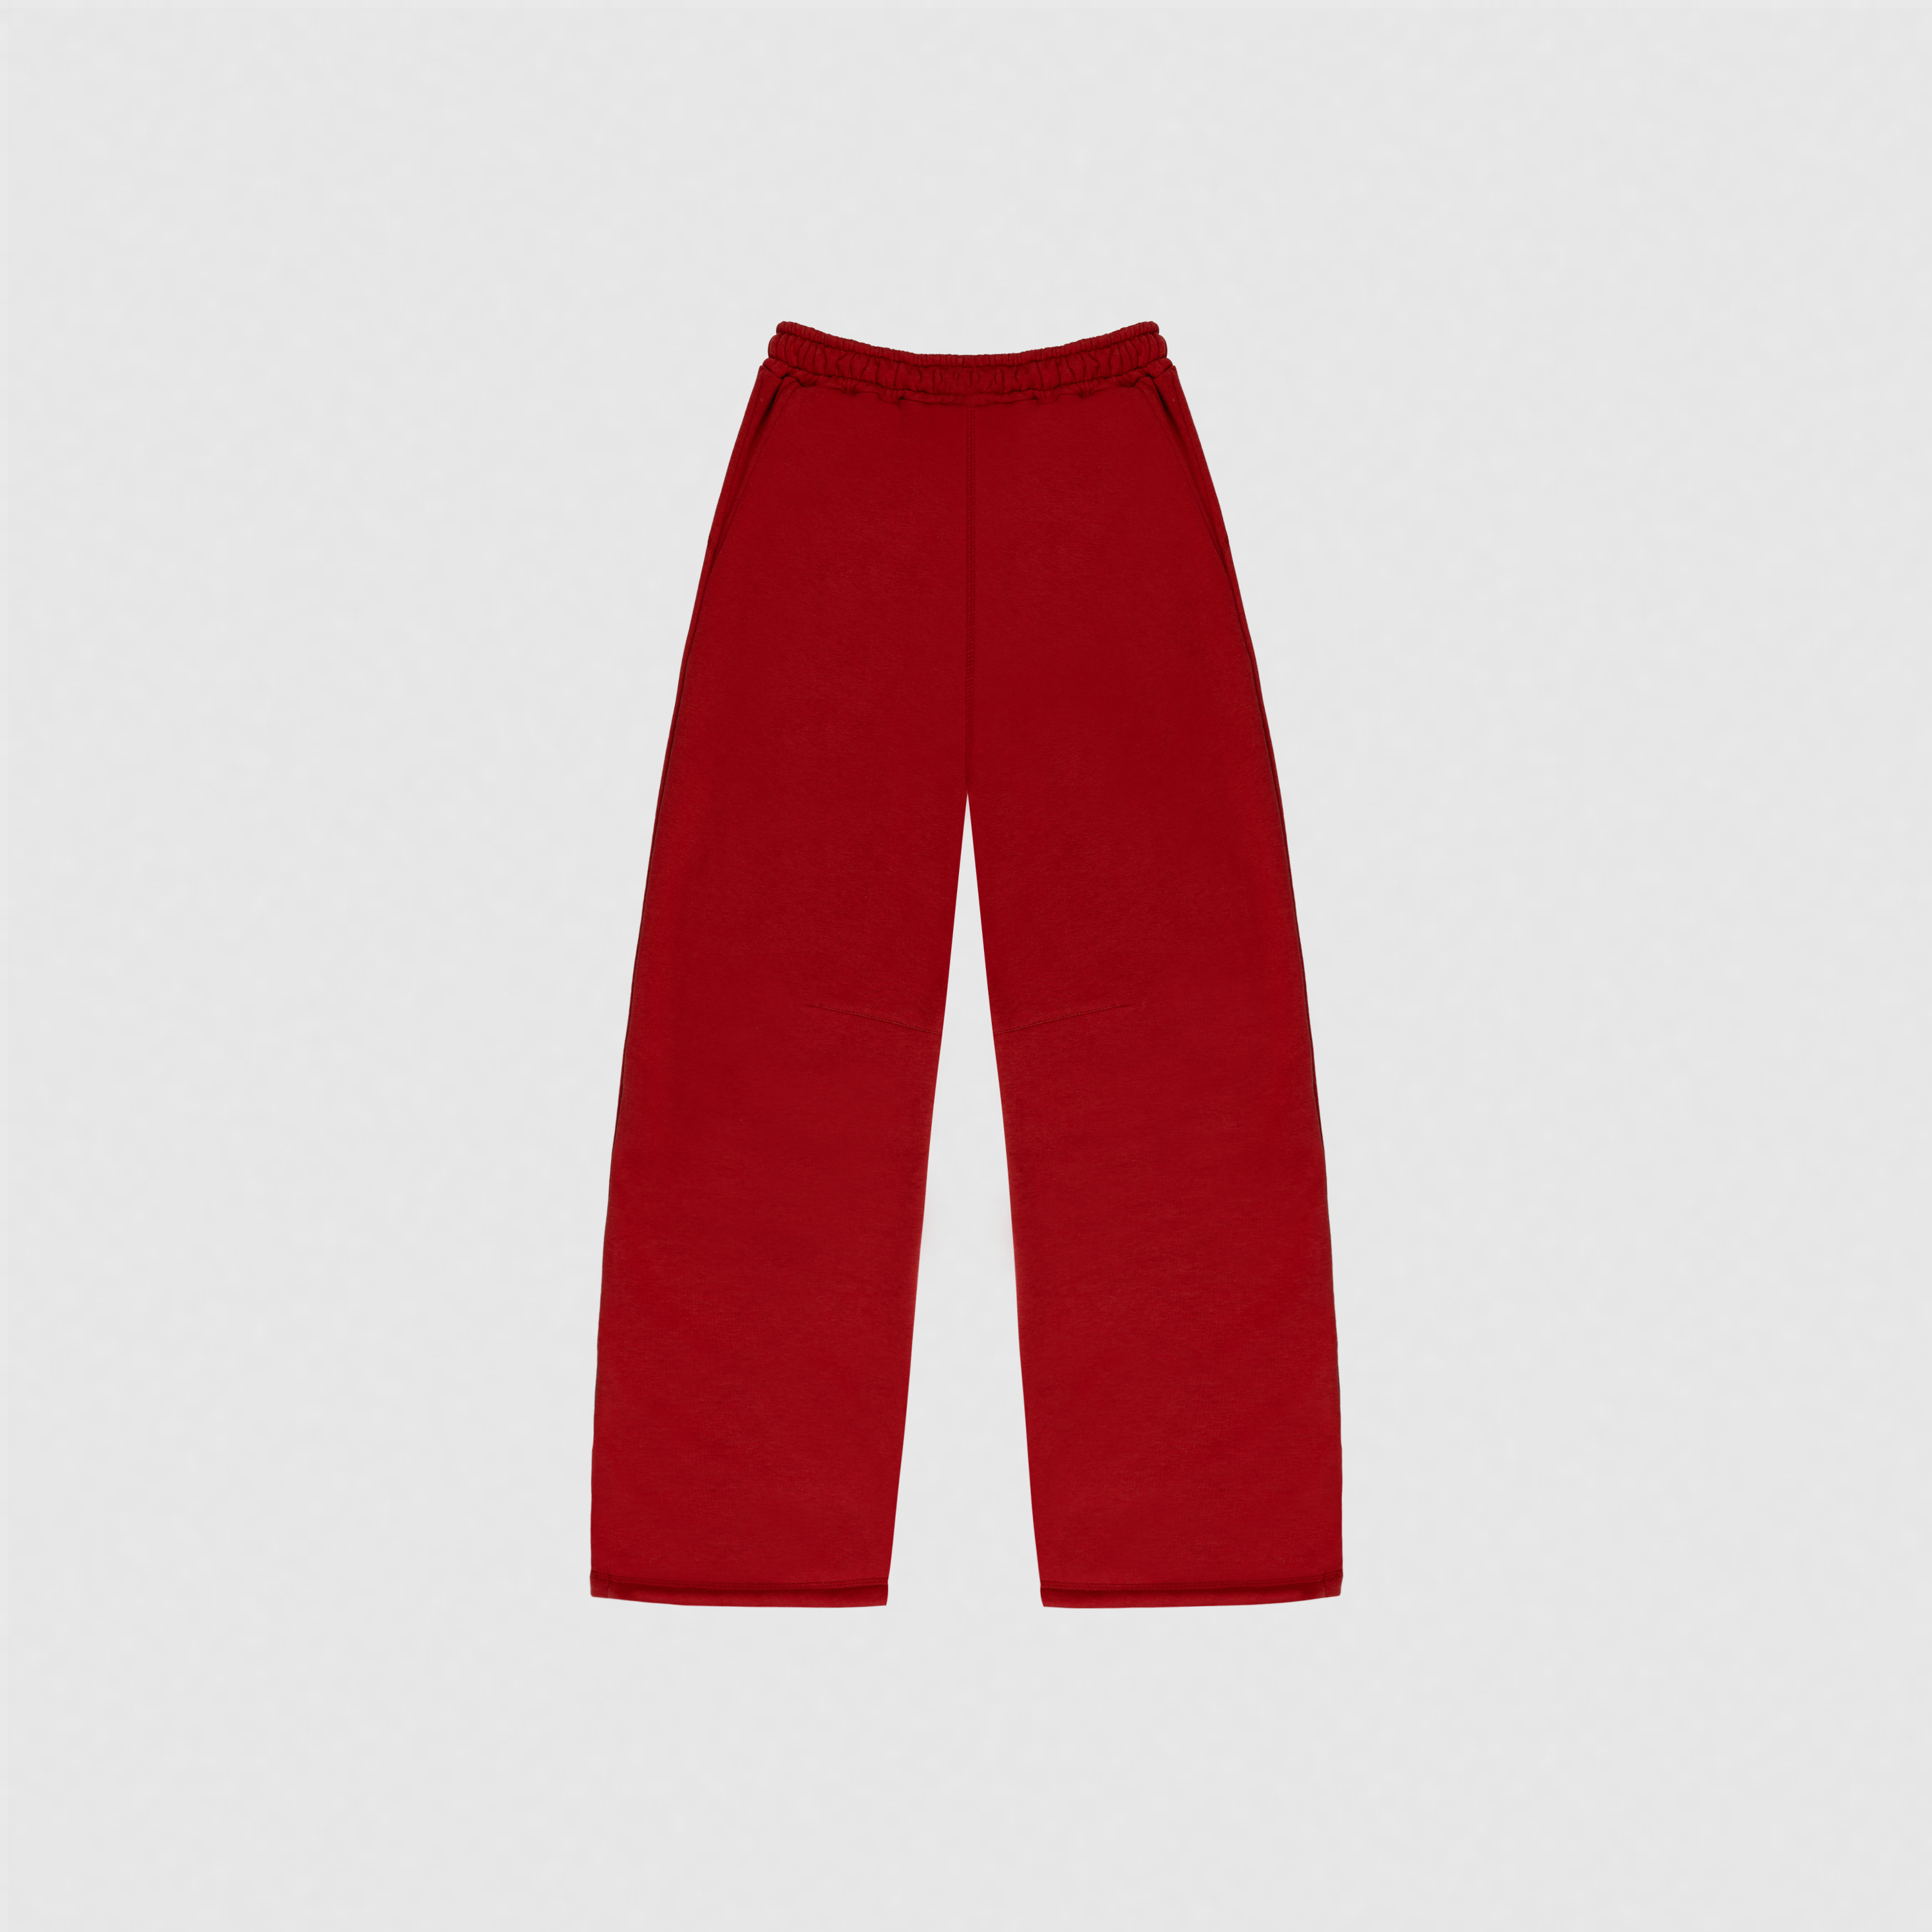 EVERYDAY OXIDE RED SWEATPANTS-Sweatpant-Lomalab-XSMALL-SMALL-Red-Lomalab